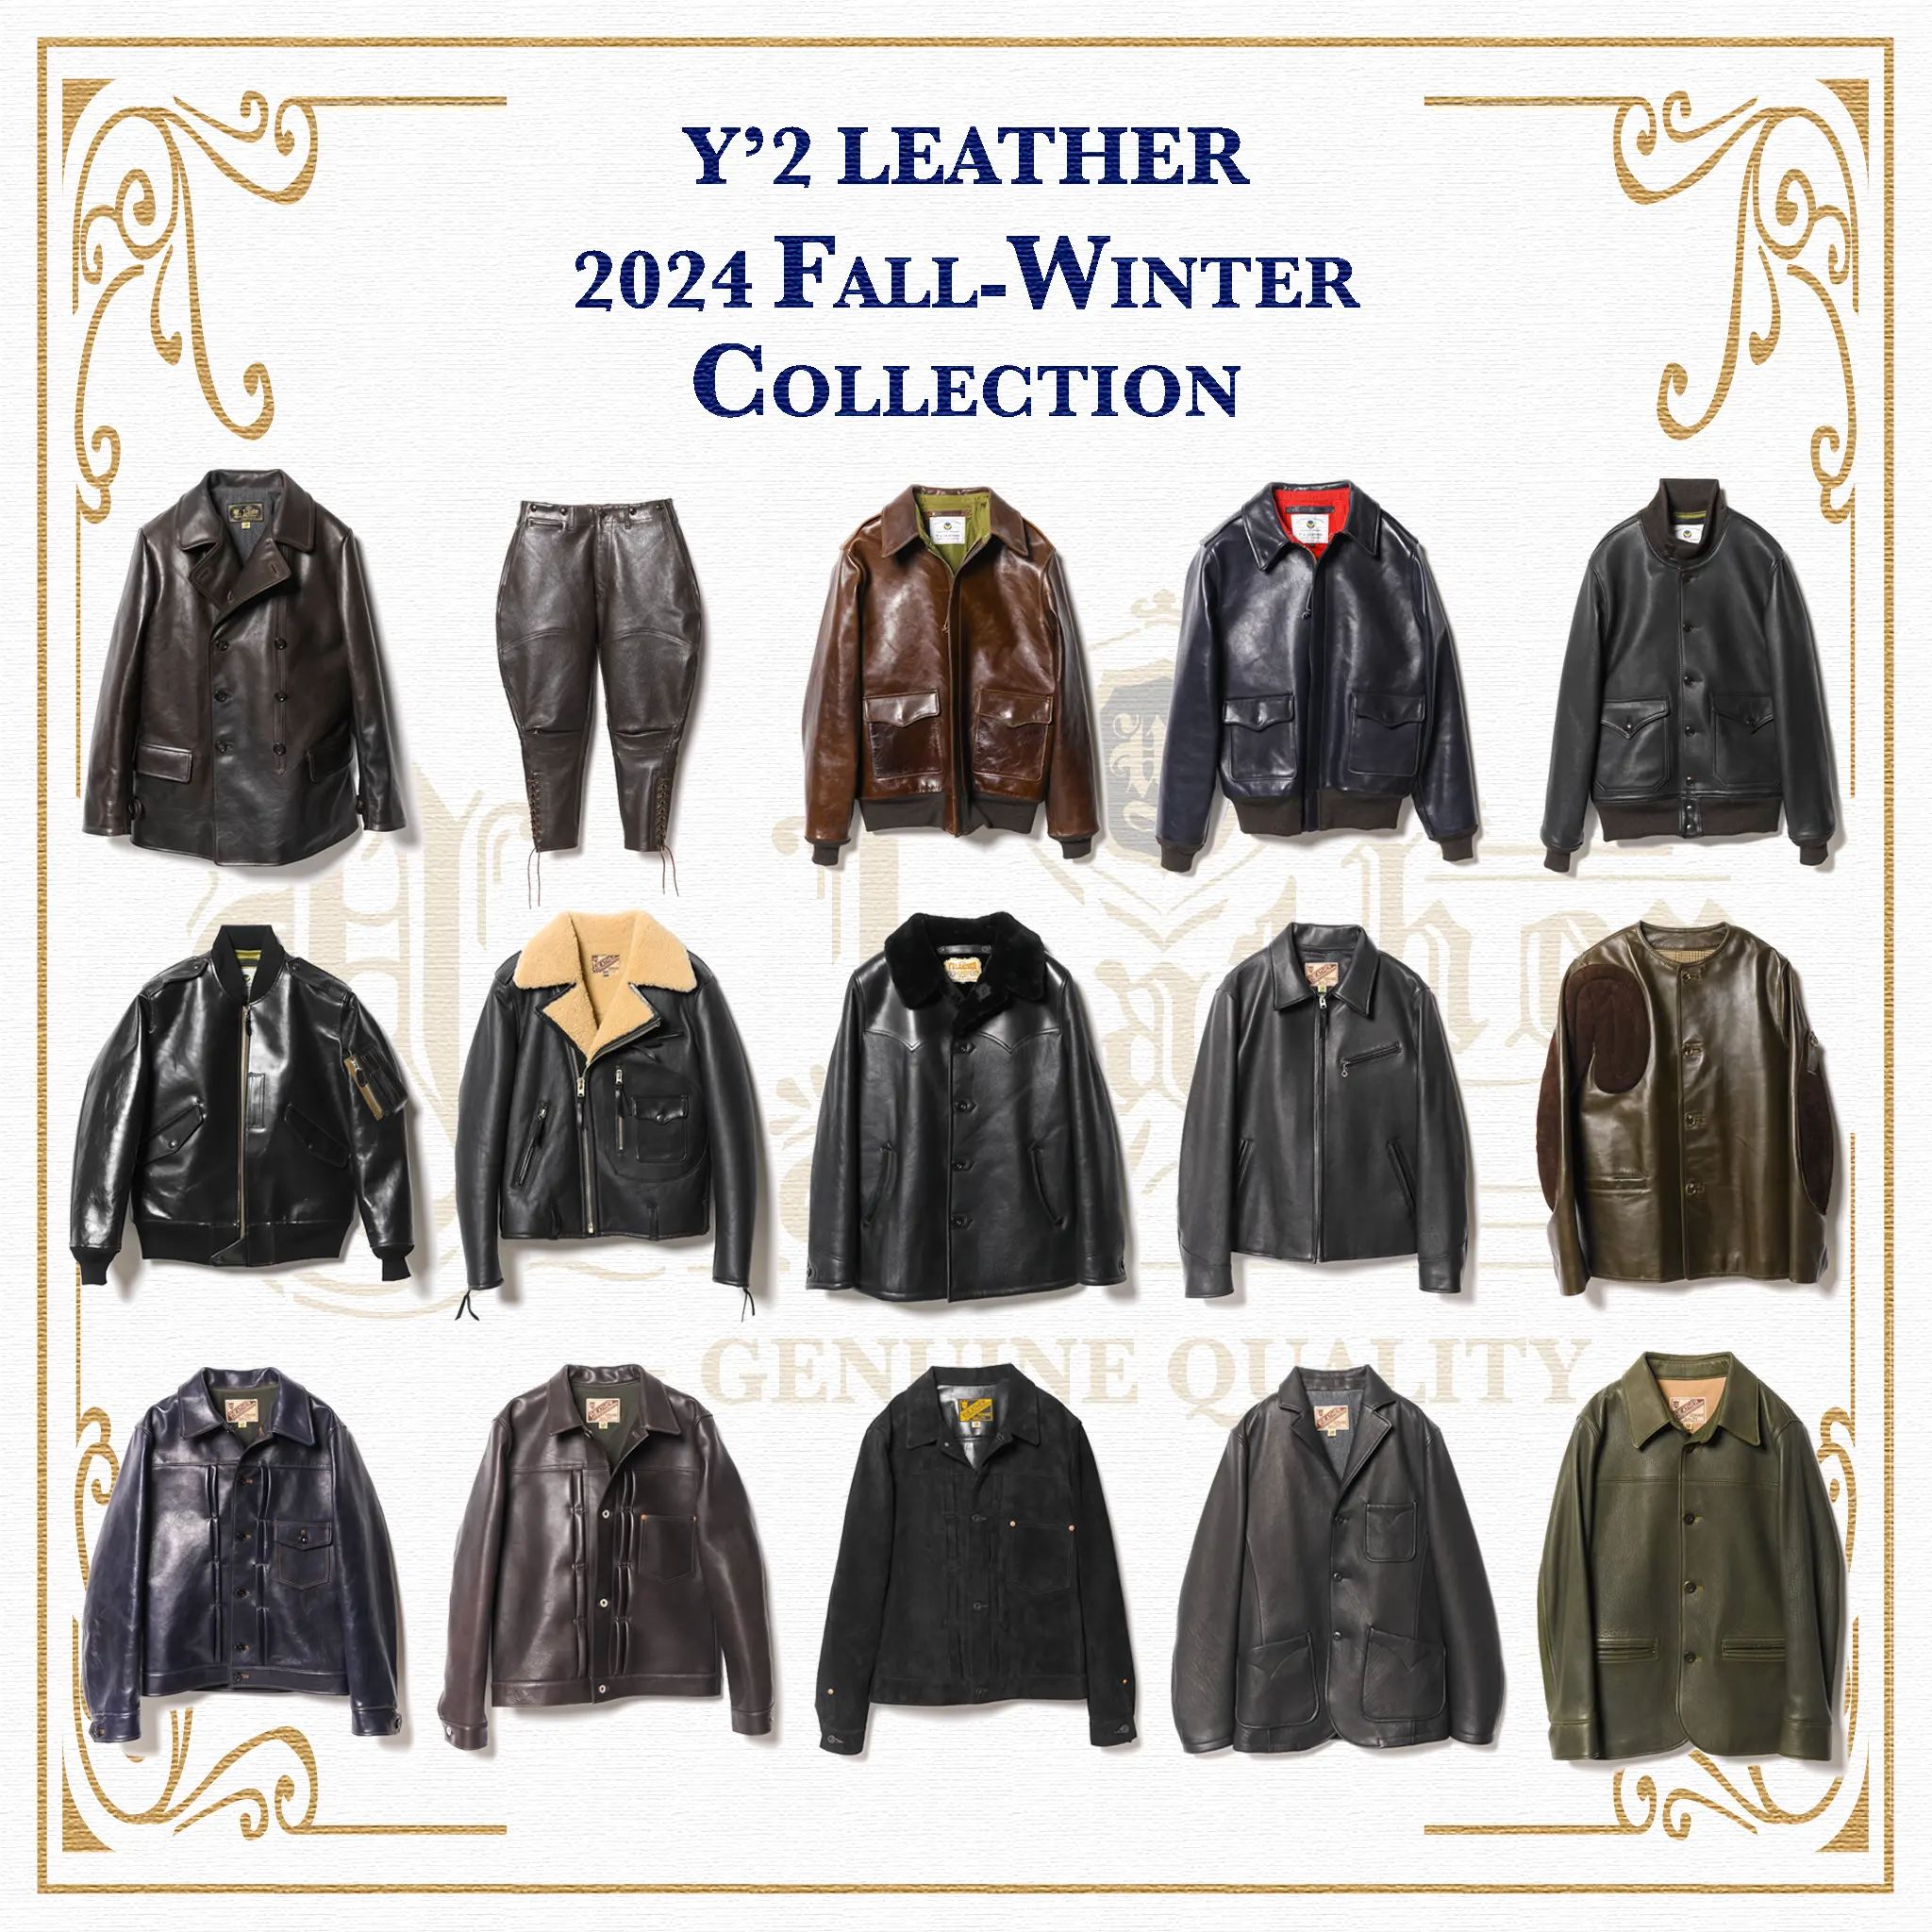 Y'2 LEATHER Fall-Winter '24 Collection... leather jacket brand